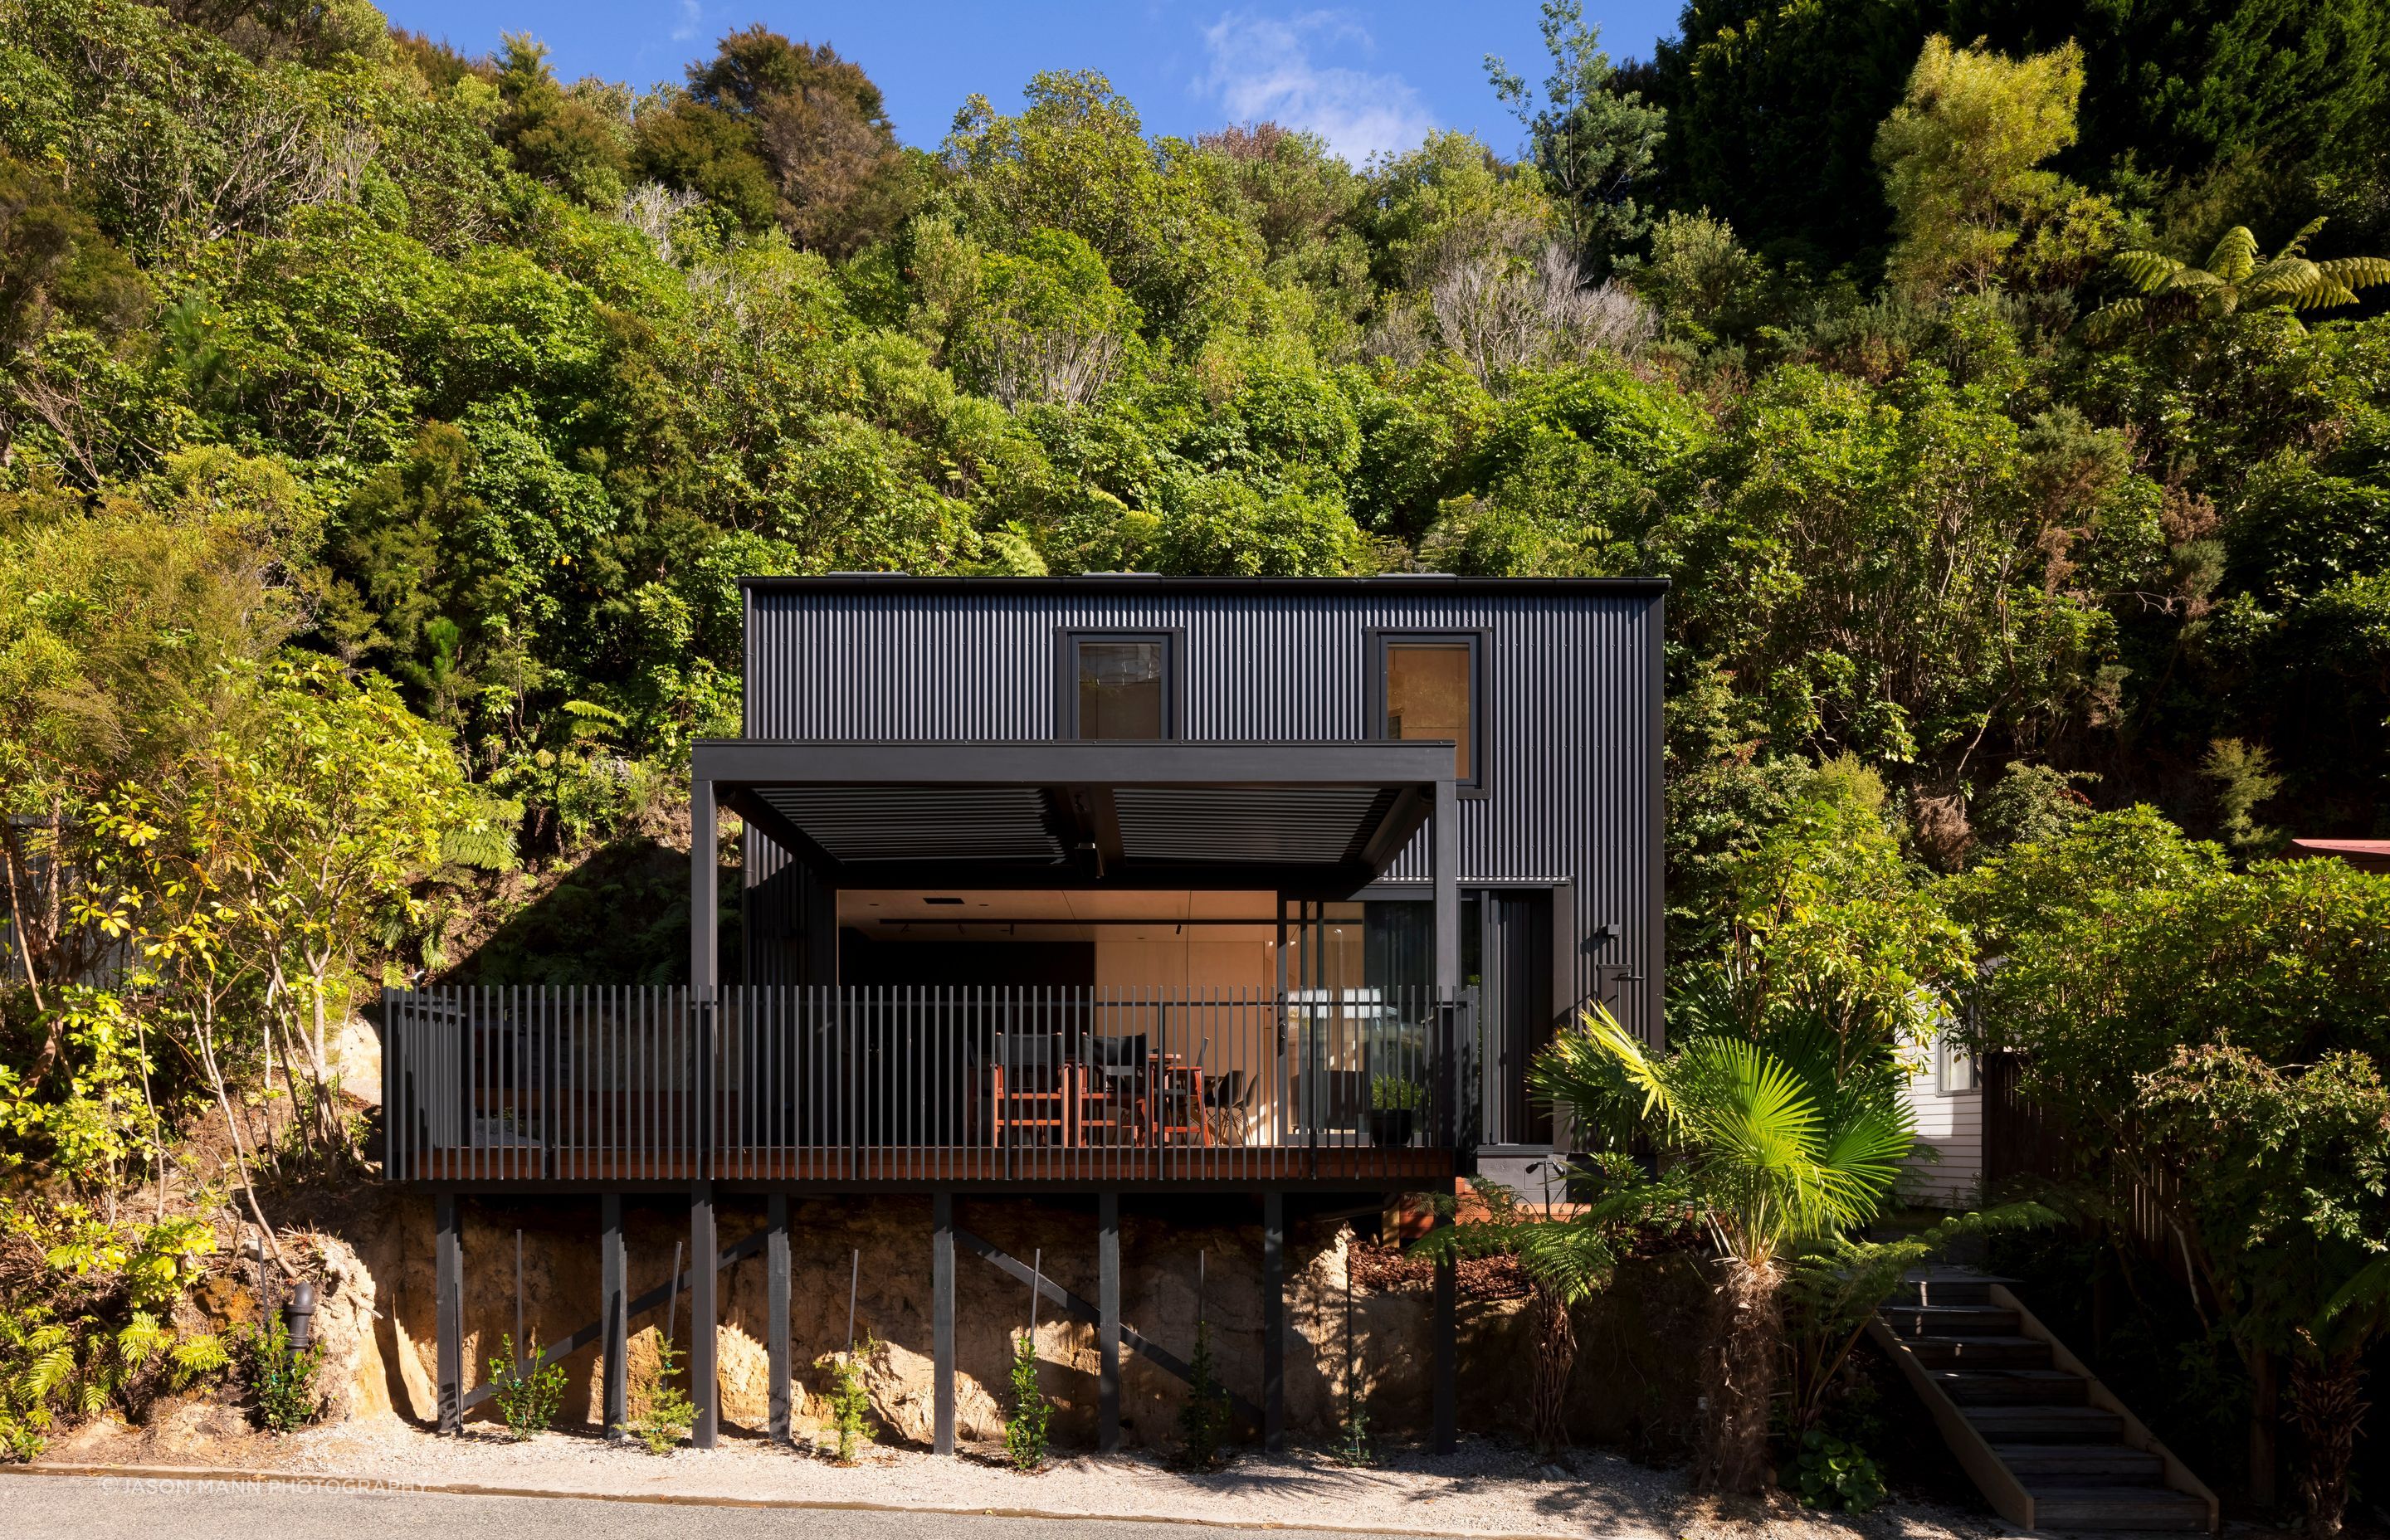 Set within a steep-sided, bush-clad gully on the edge of the Abel Tasman National Park, the building site for this bach, which has replaced the original dwelling, was a 40 sqm platform cut into the foot of the northwest side of the valley.